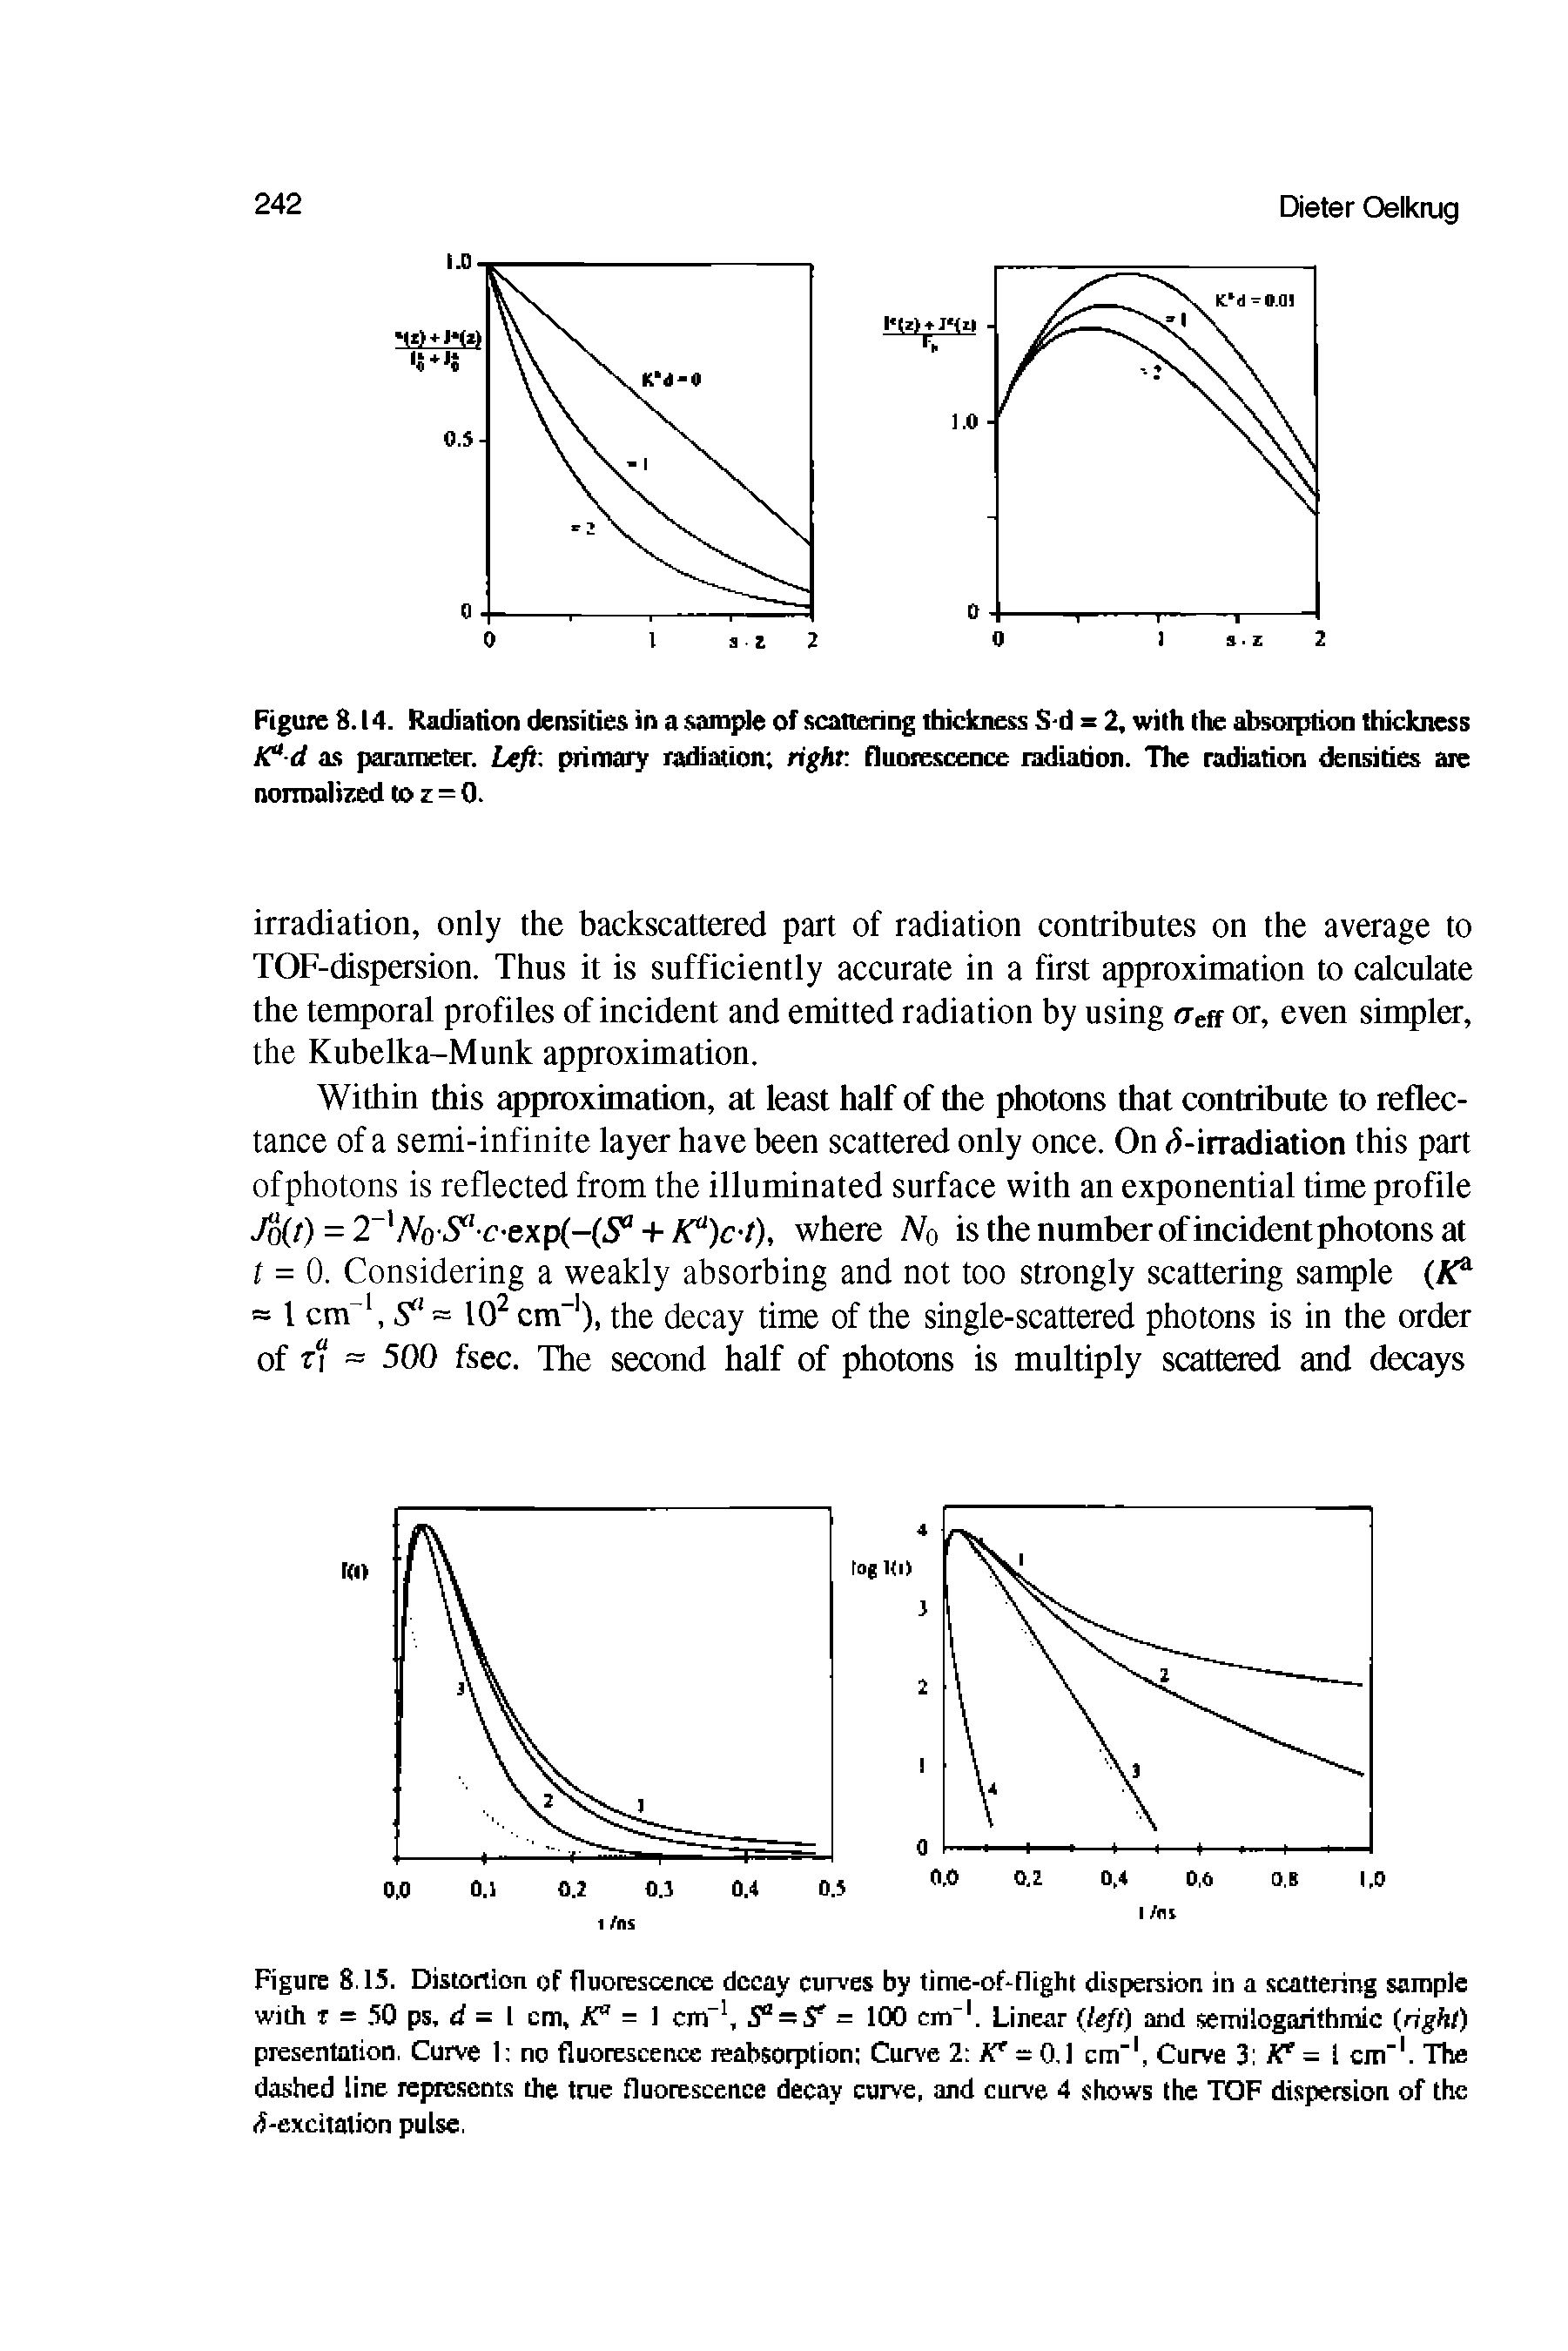 Figure 8.14. Radiation densities in a sample of scattering thickness S-d = 2, with the absorption thickness Kftd as parameter. Left primary radiation right fluorescence radiation. The radiation densities are normalized to z - 0.